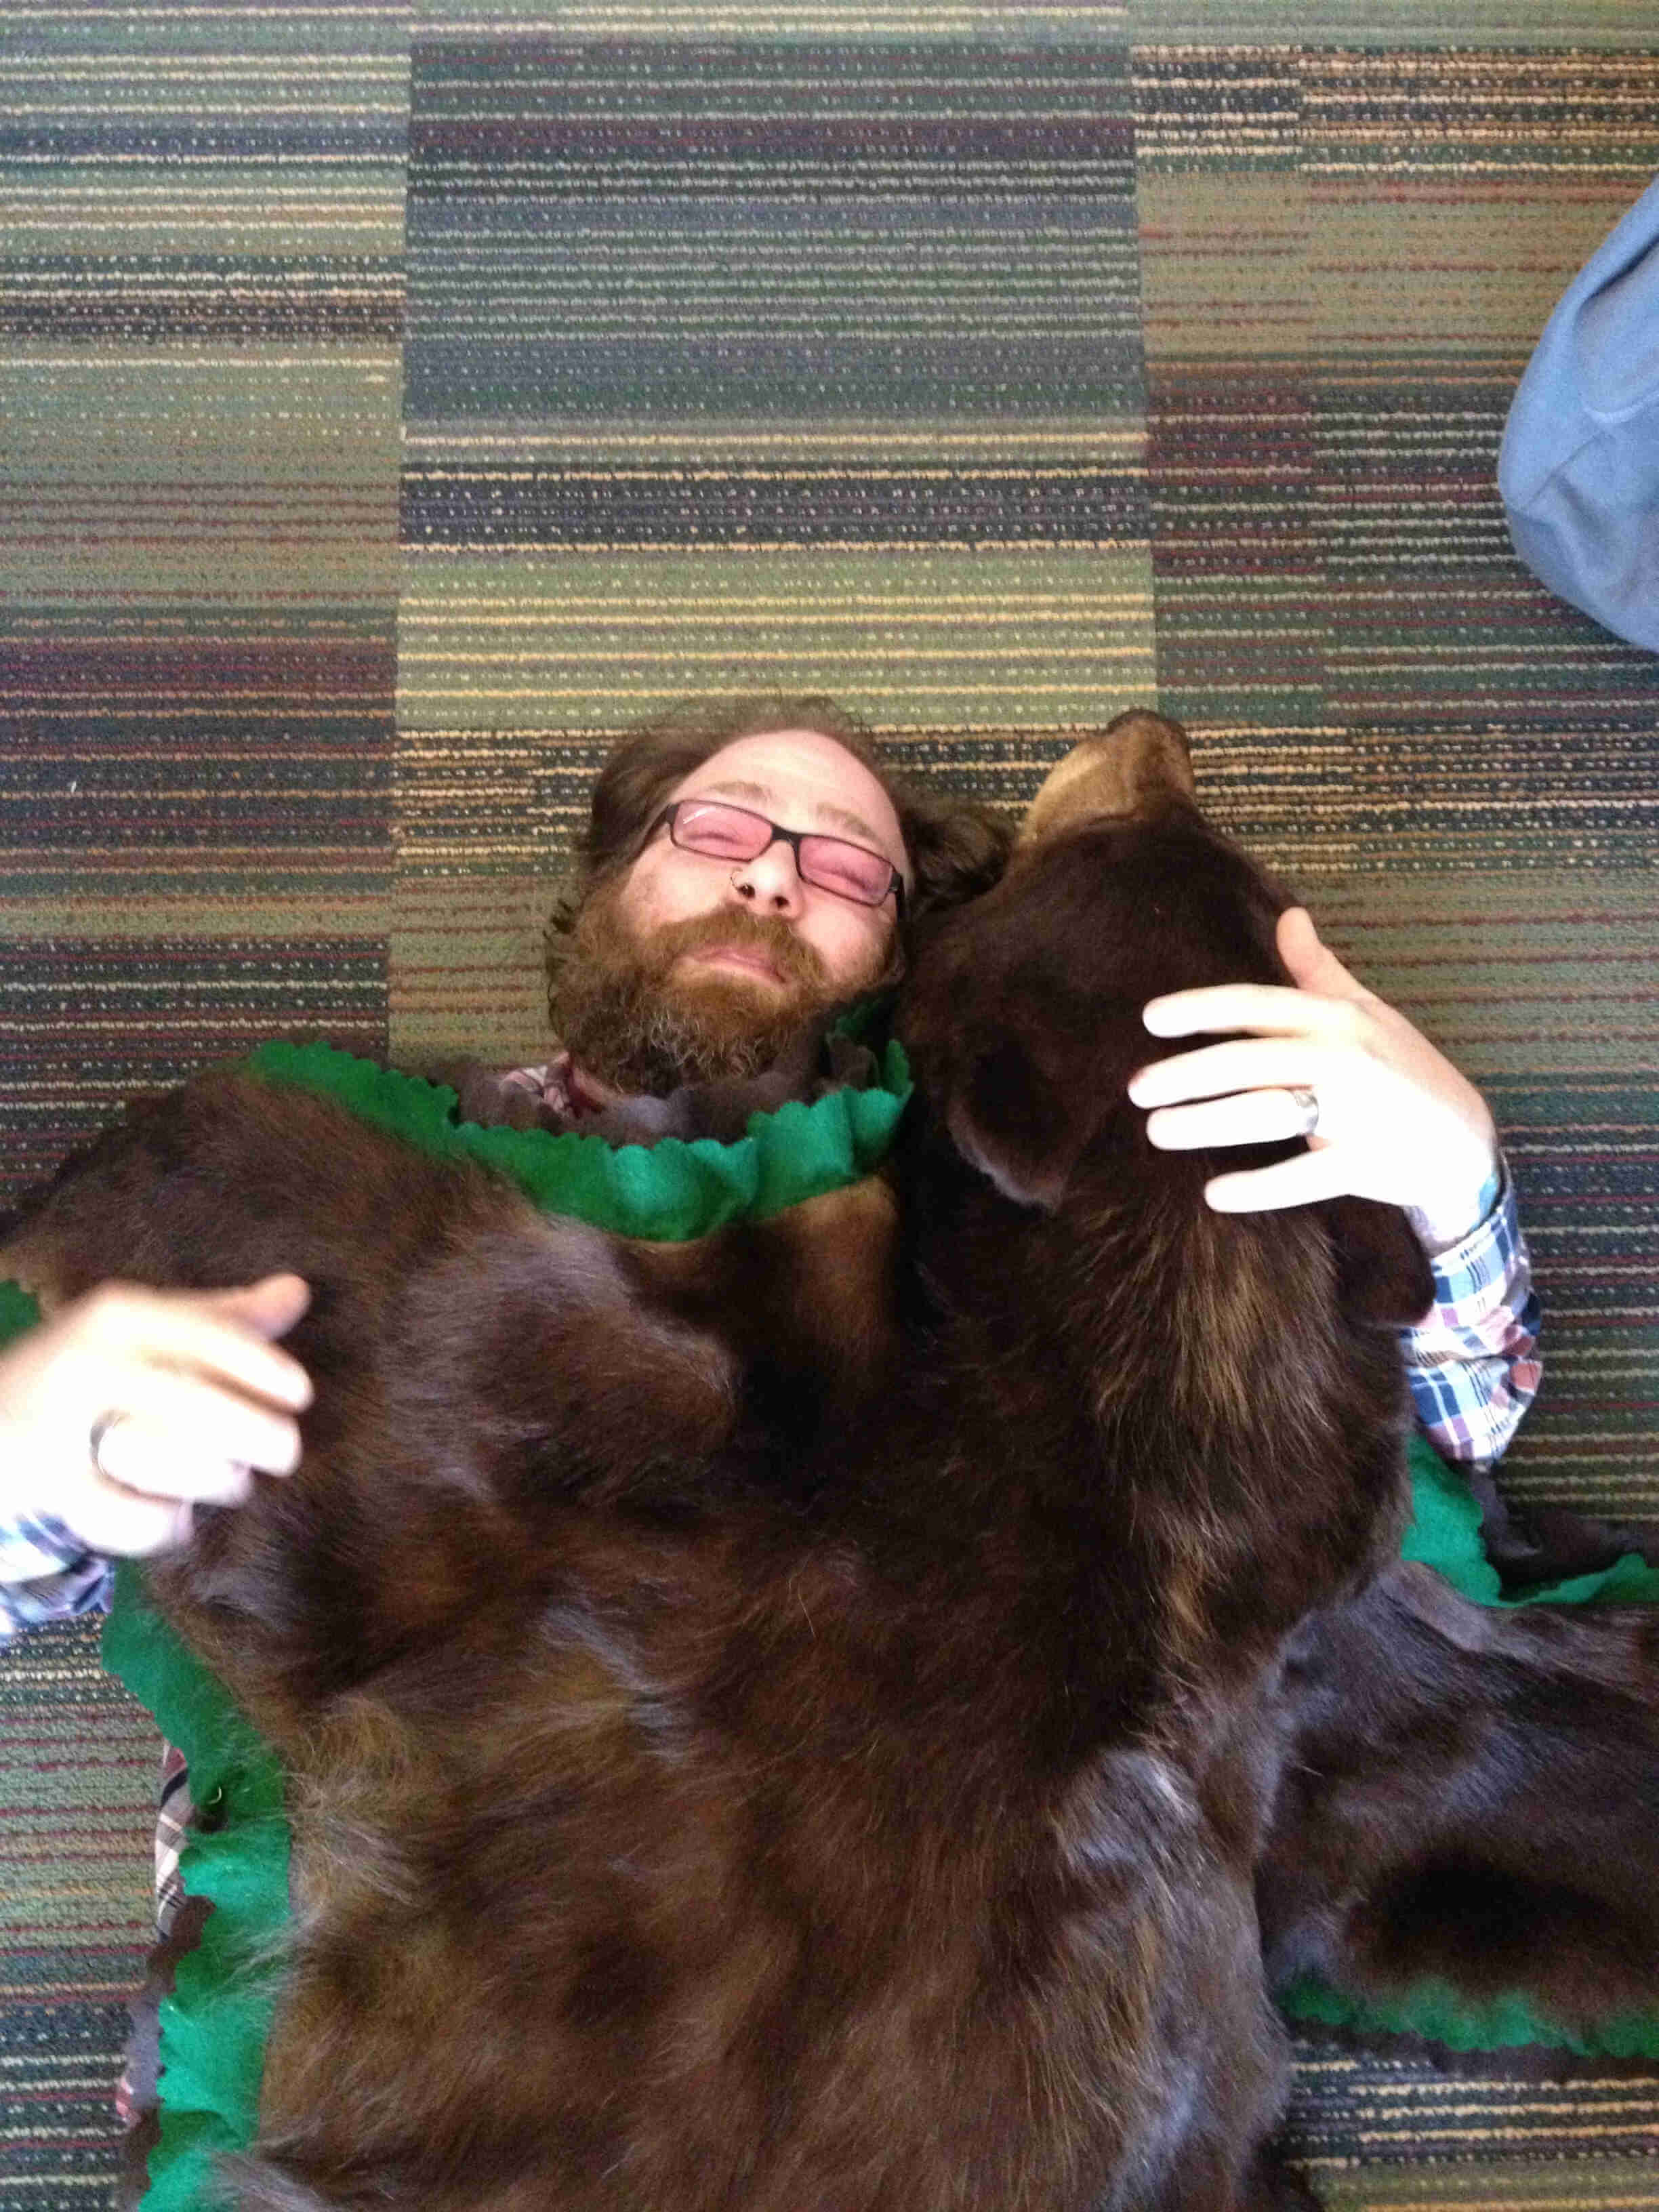 Downward, front view of a person with a beard, laying on a carpeted office floor with a bear skin rug covering them